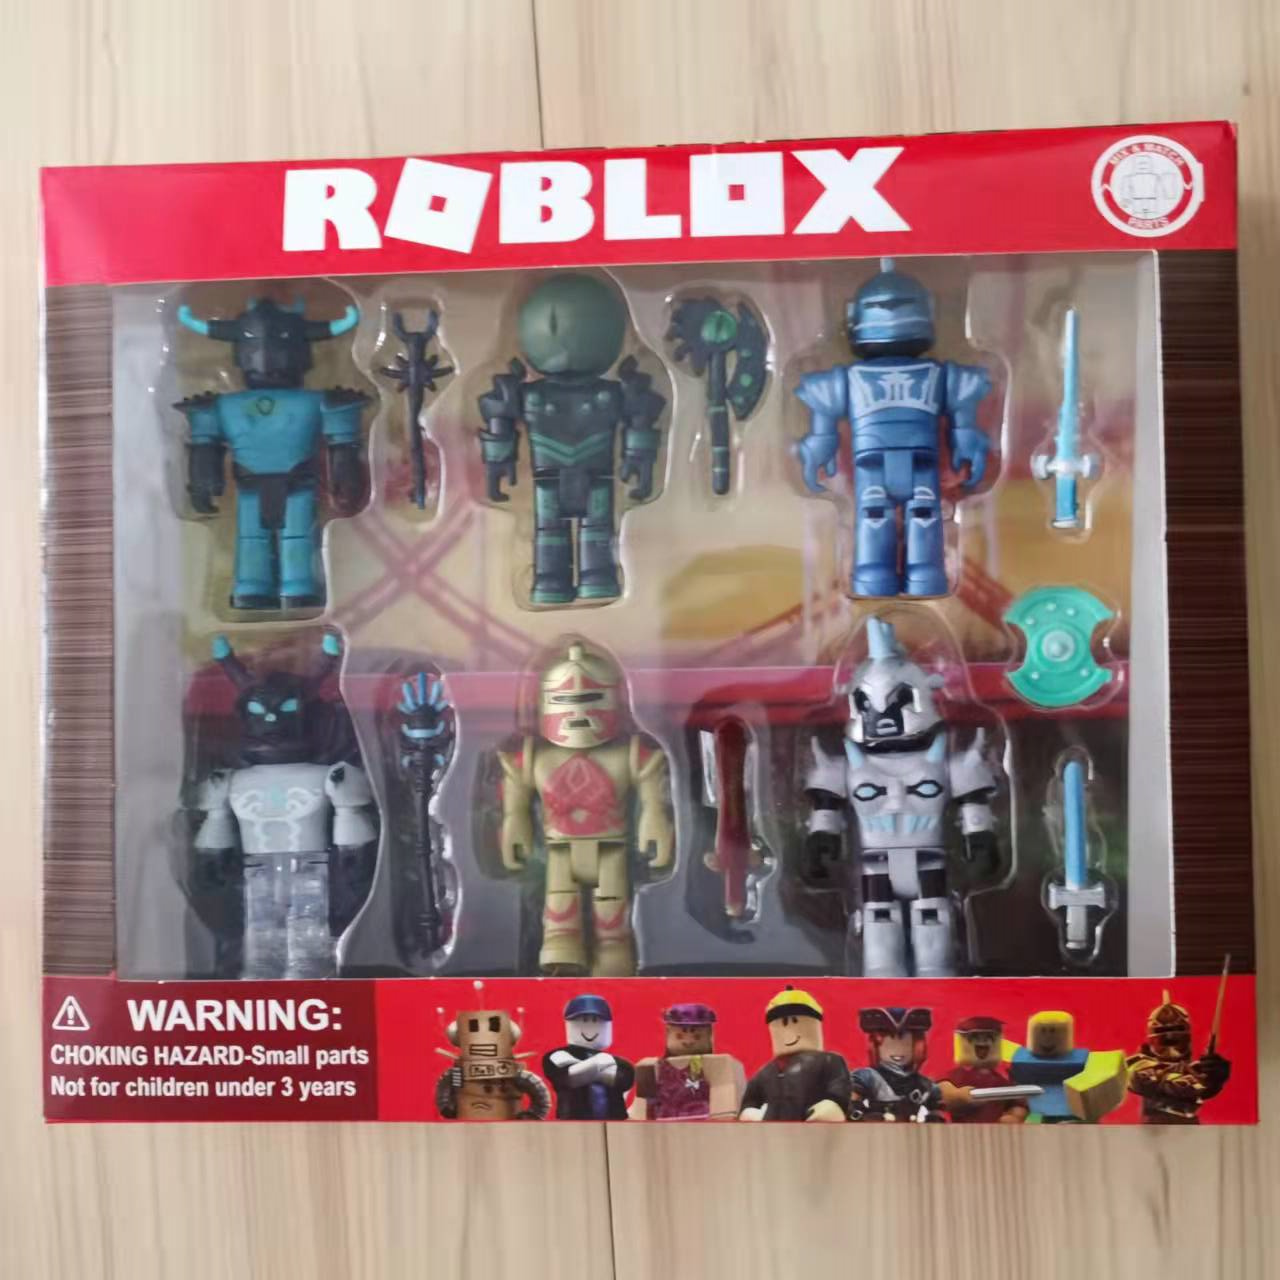 Roblox Action Figures 7cm Pvc Suite Dolls Toys Anime Model Figurines For  Decoration Collection Christmas Gifts For Kids12ren No Box